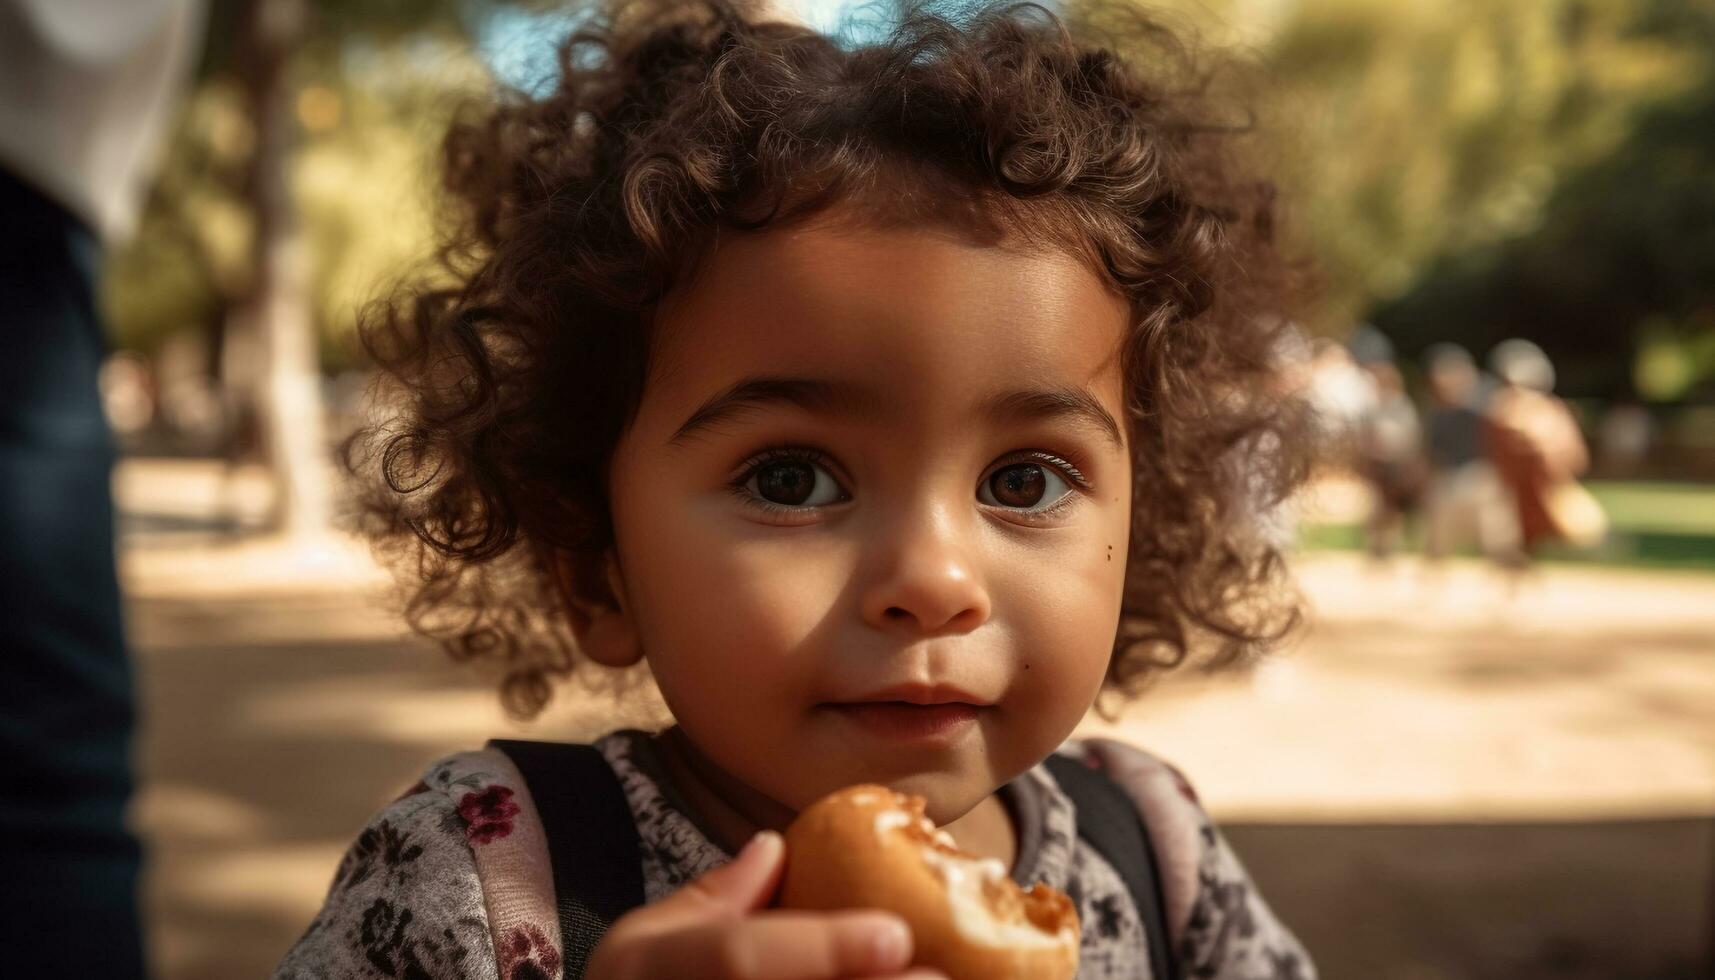 A cute, smiling child enjoying nature, eating and looking at camera generated by AI photo